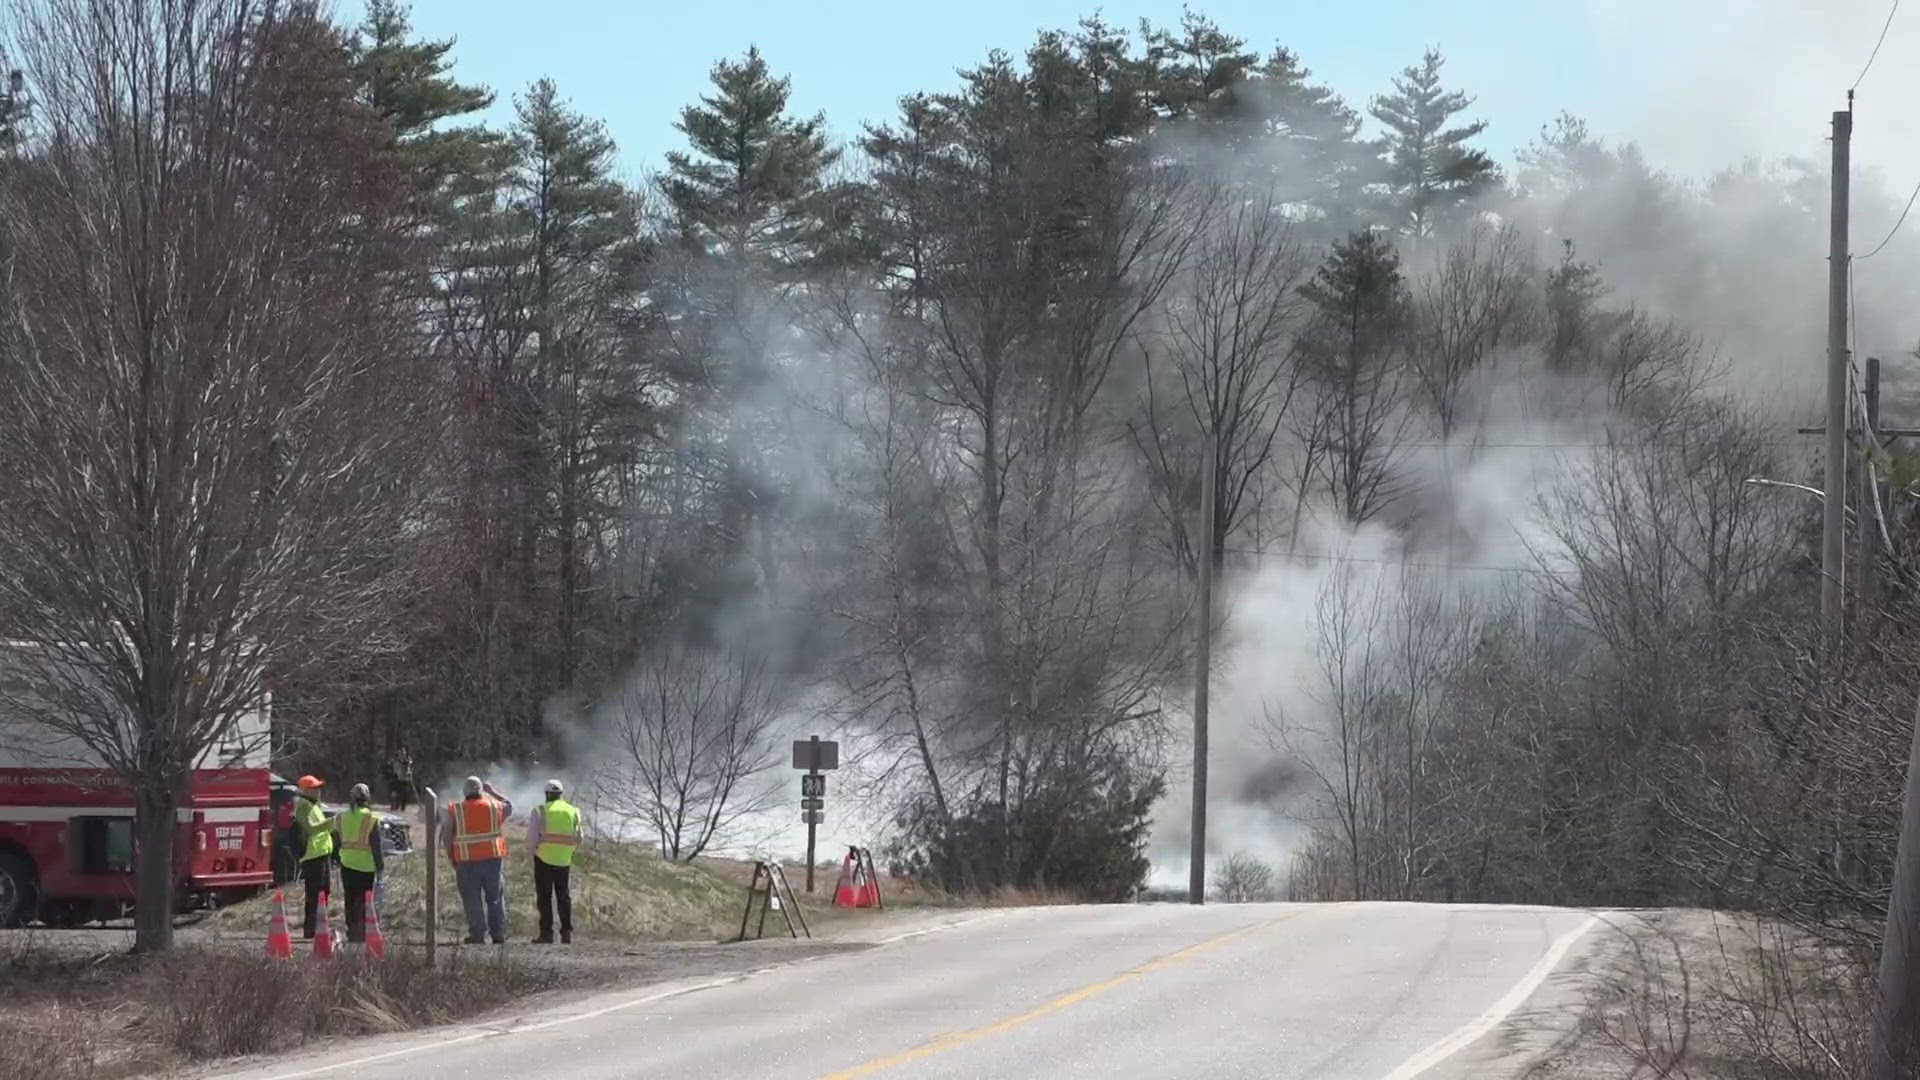 The controlled burn was conducted by the Maine Forest Service and Scarborough Land Trust.